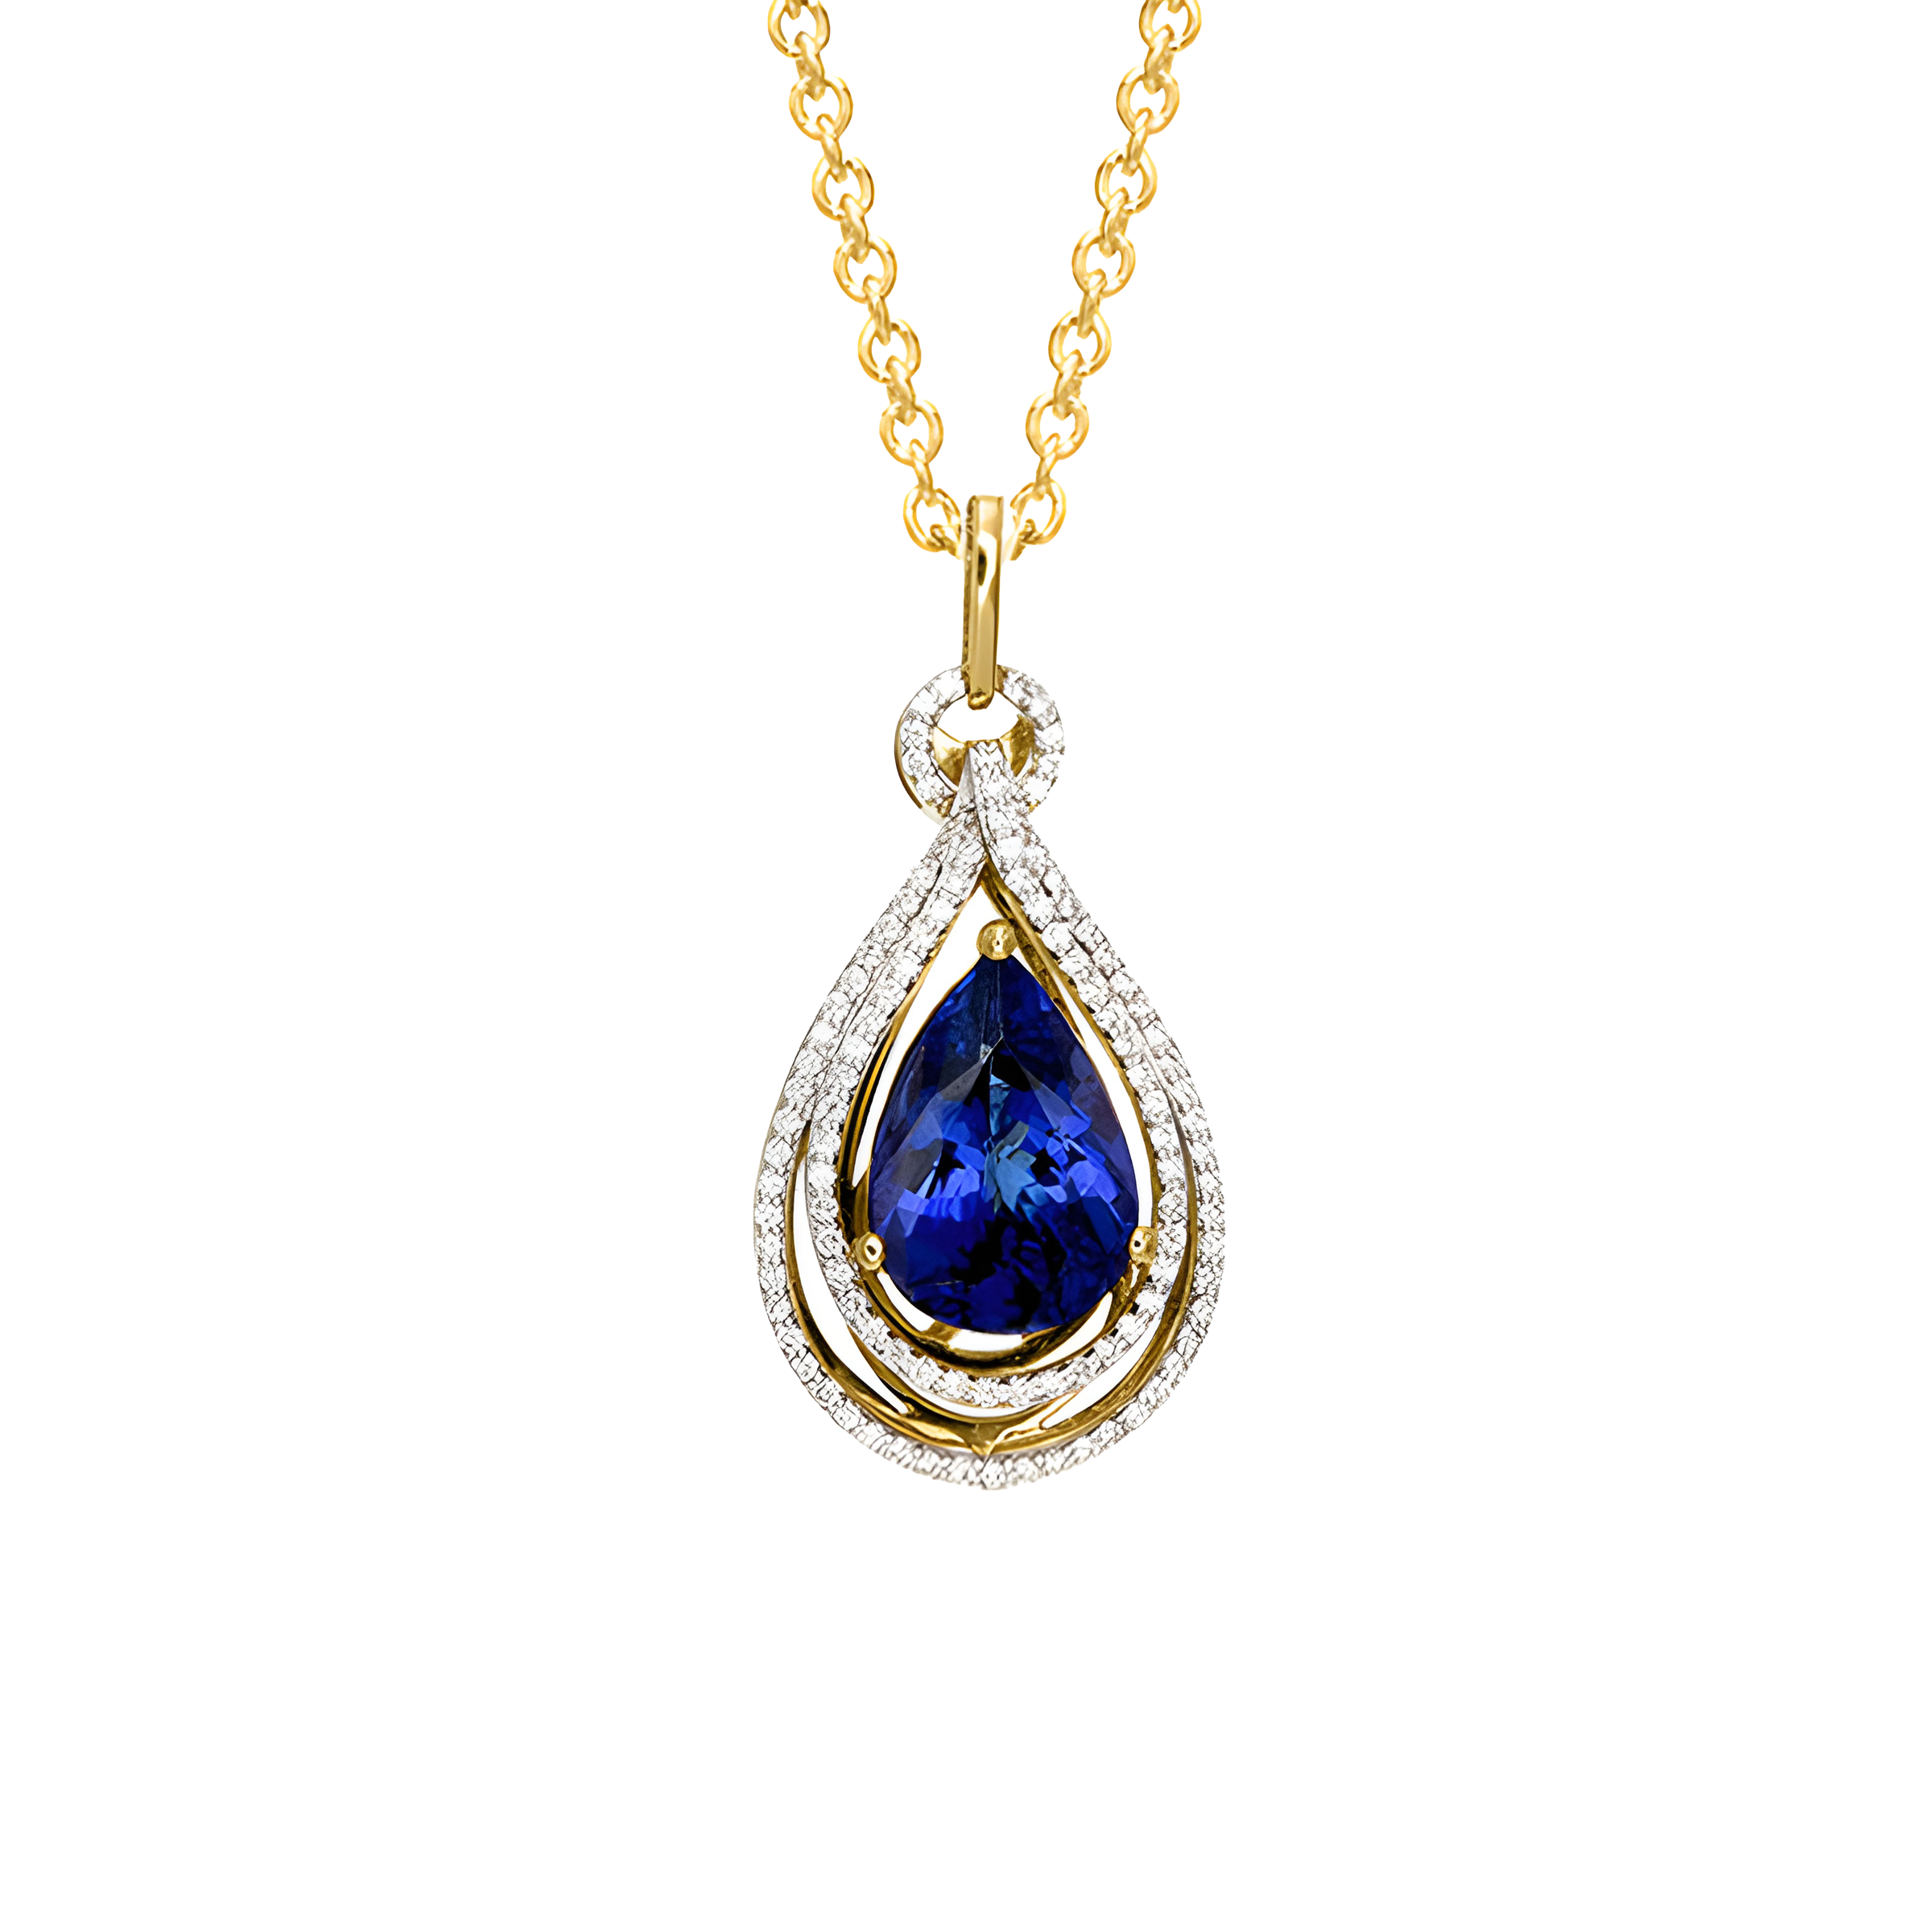 Pear Shaped Tanzanite and Diamond Pendent Necklace in 18k Yellow Gold